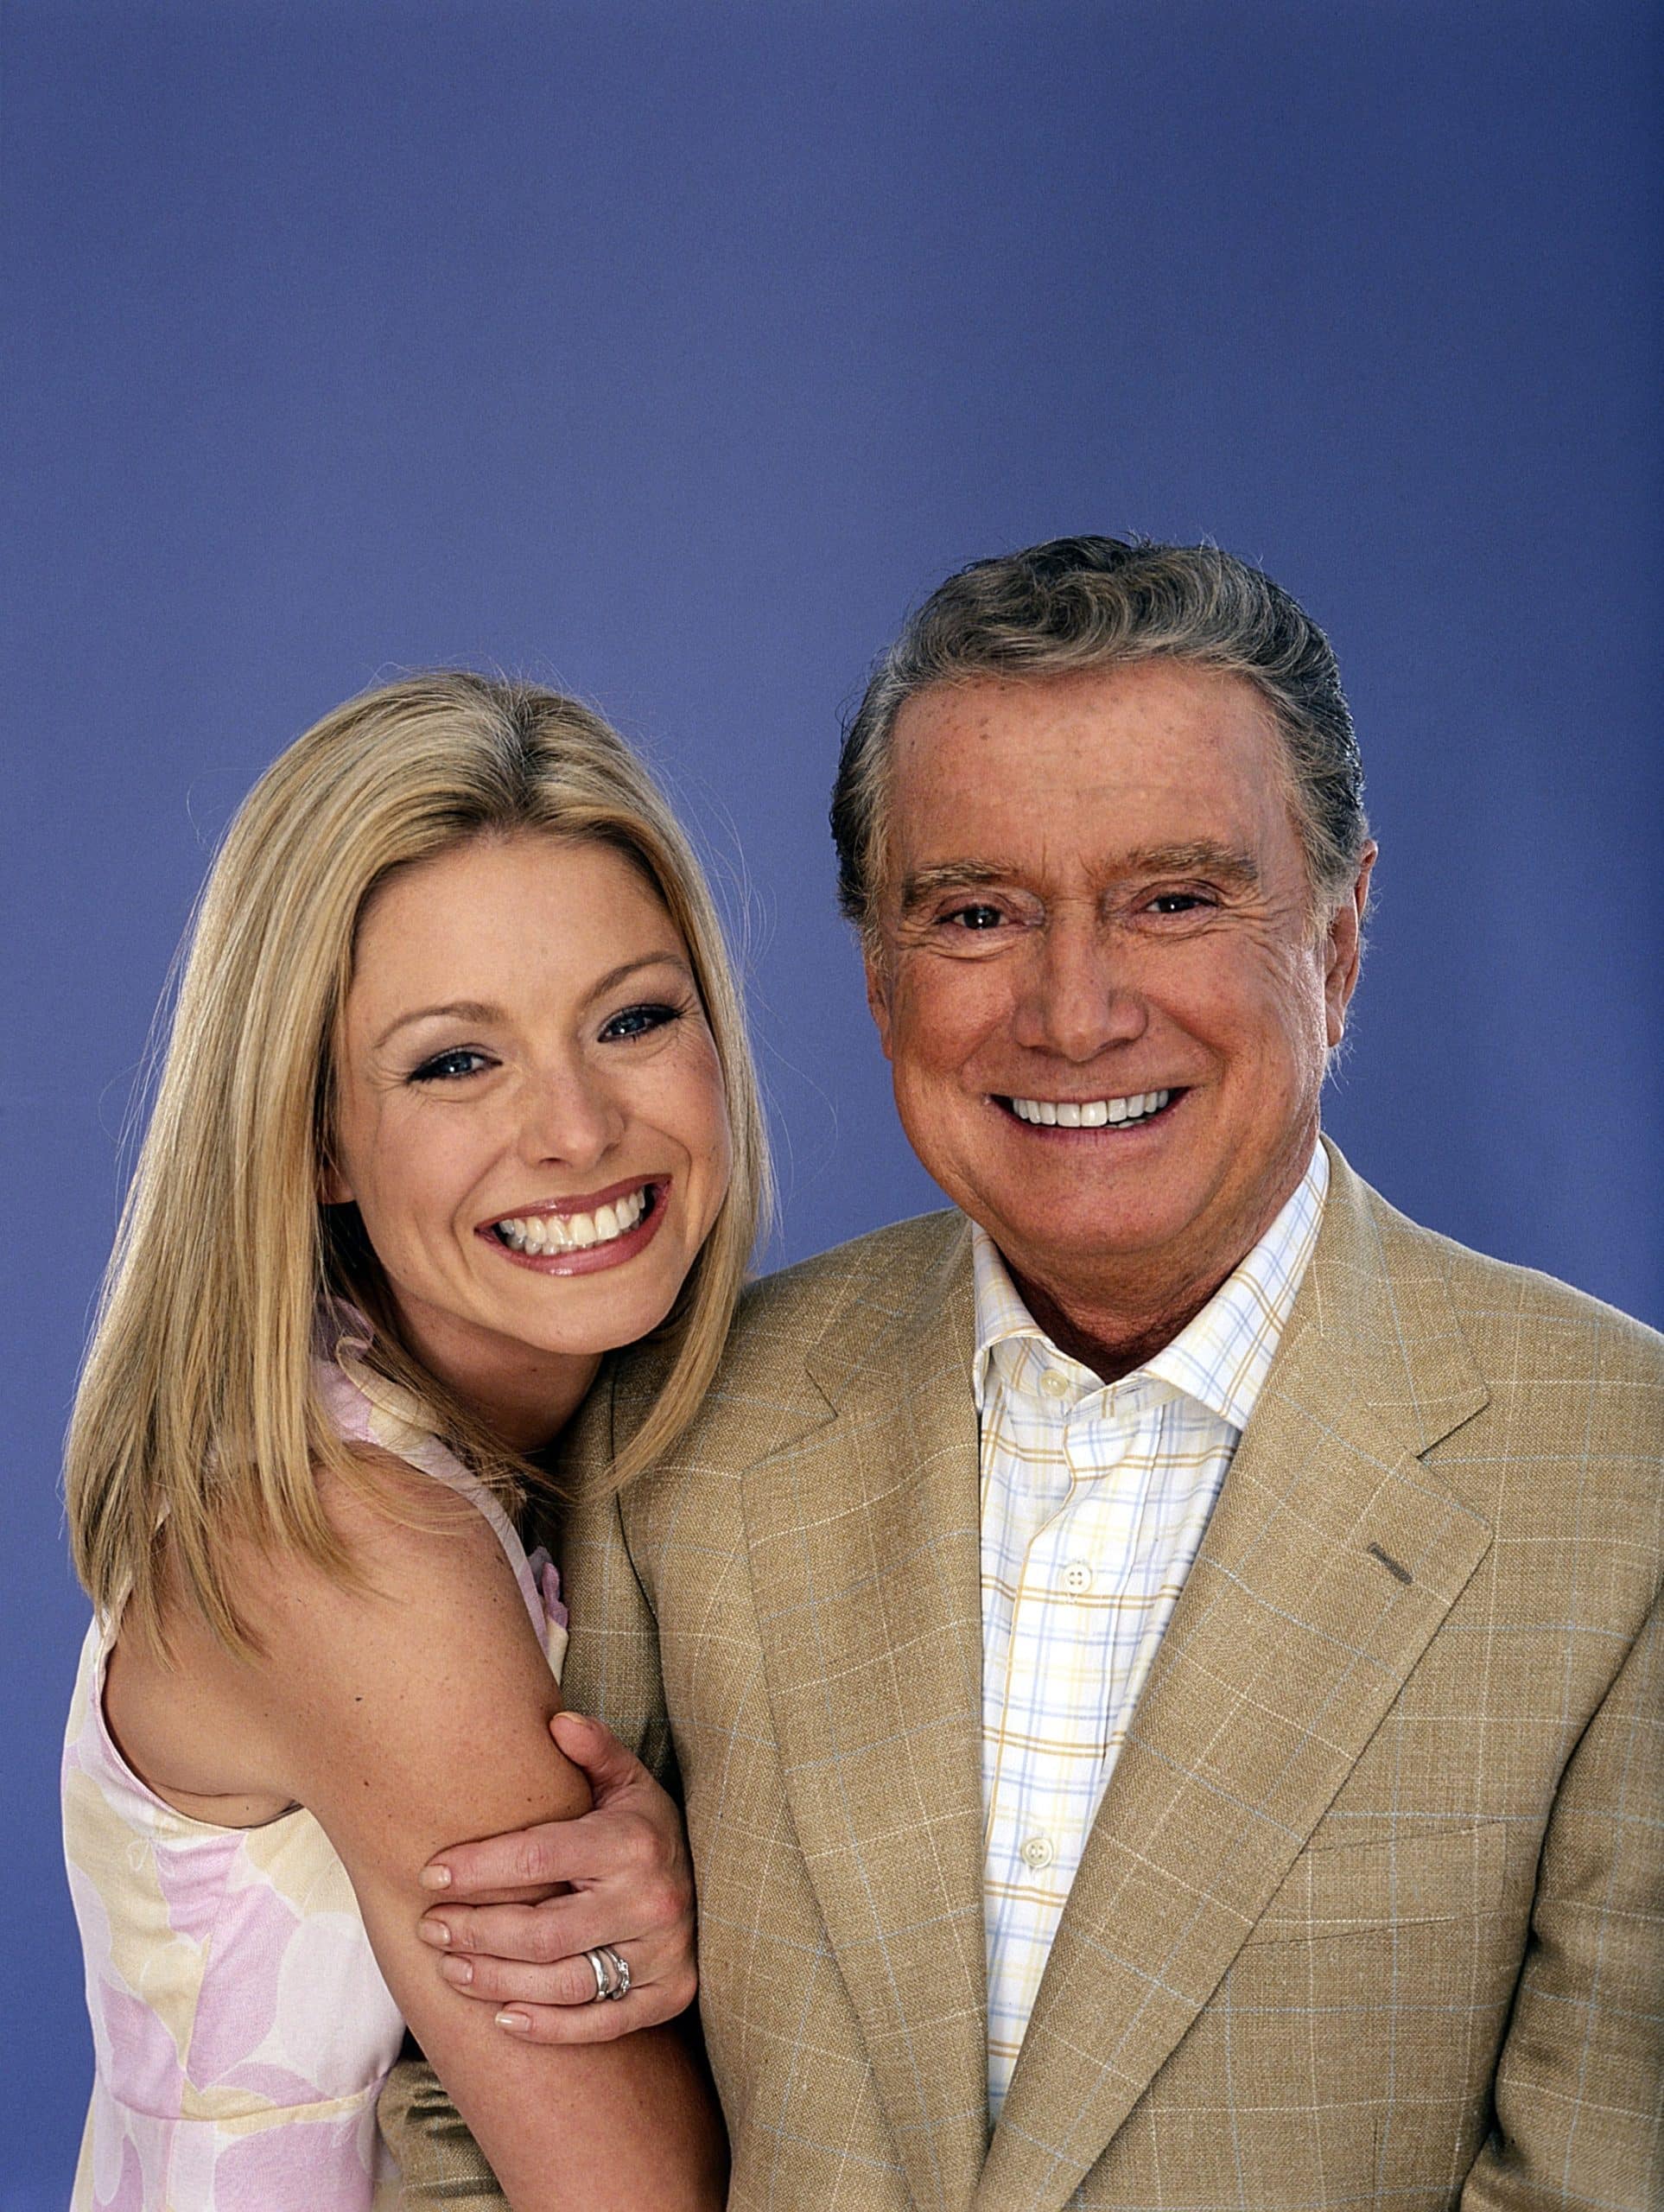 LIVE WITH REGIS AND KELLY, from left: Kelly Ripa, Regis Philbin, 2001-2011